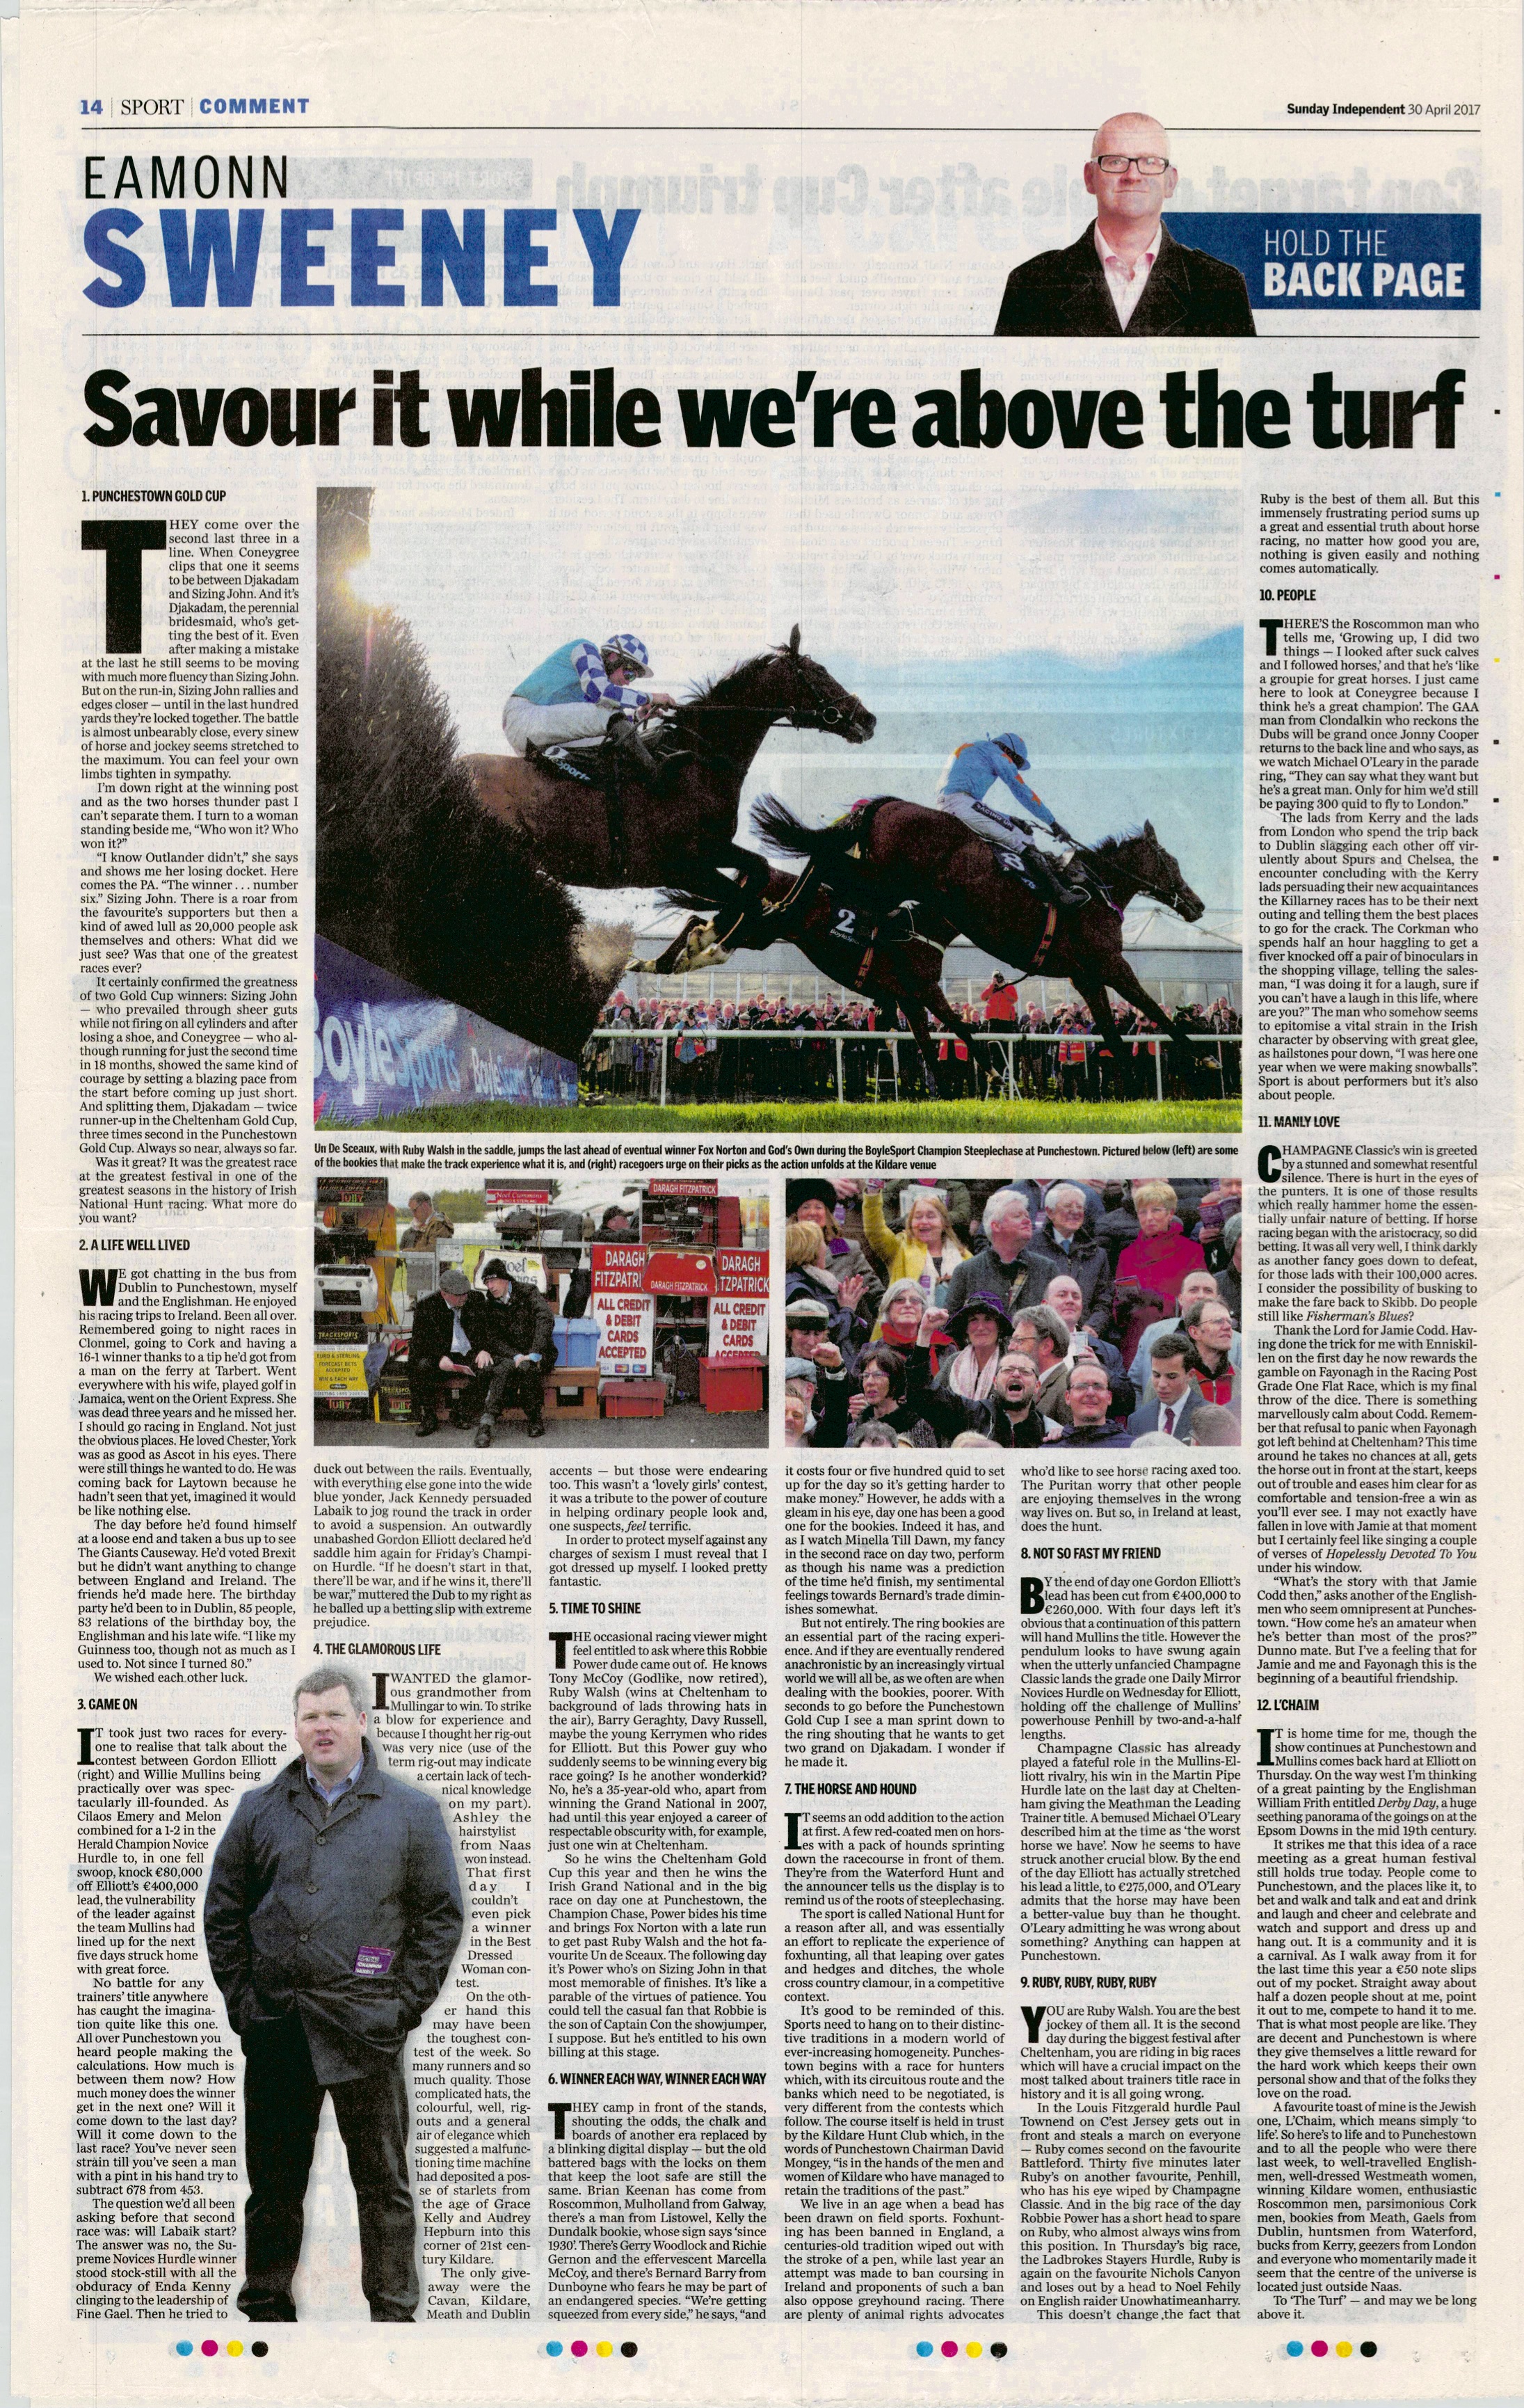  Un De Sceaux and Ruby Walsh Punchestown April 30 2017  / Sunday Independent  